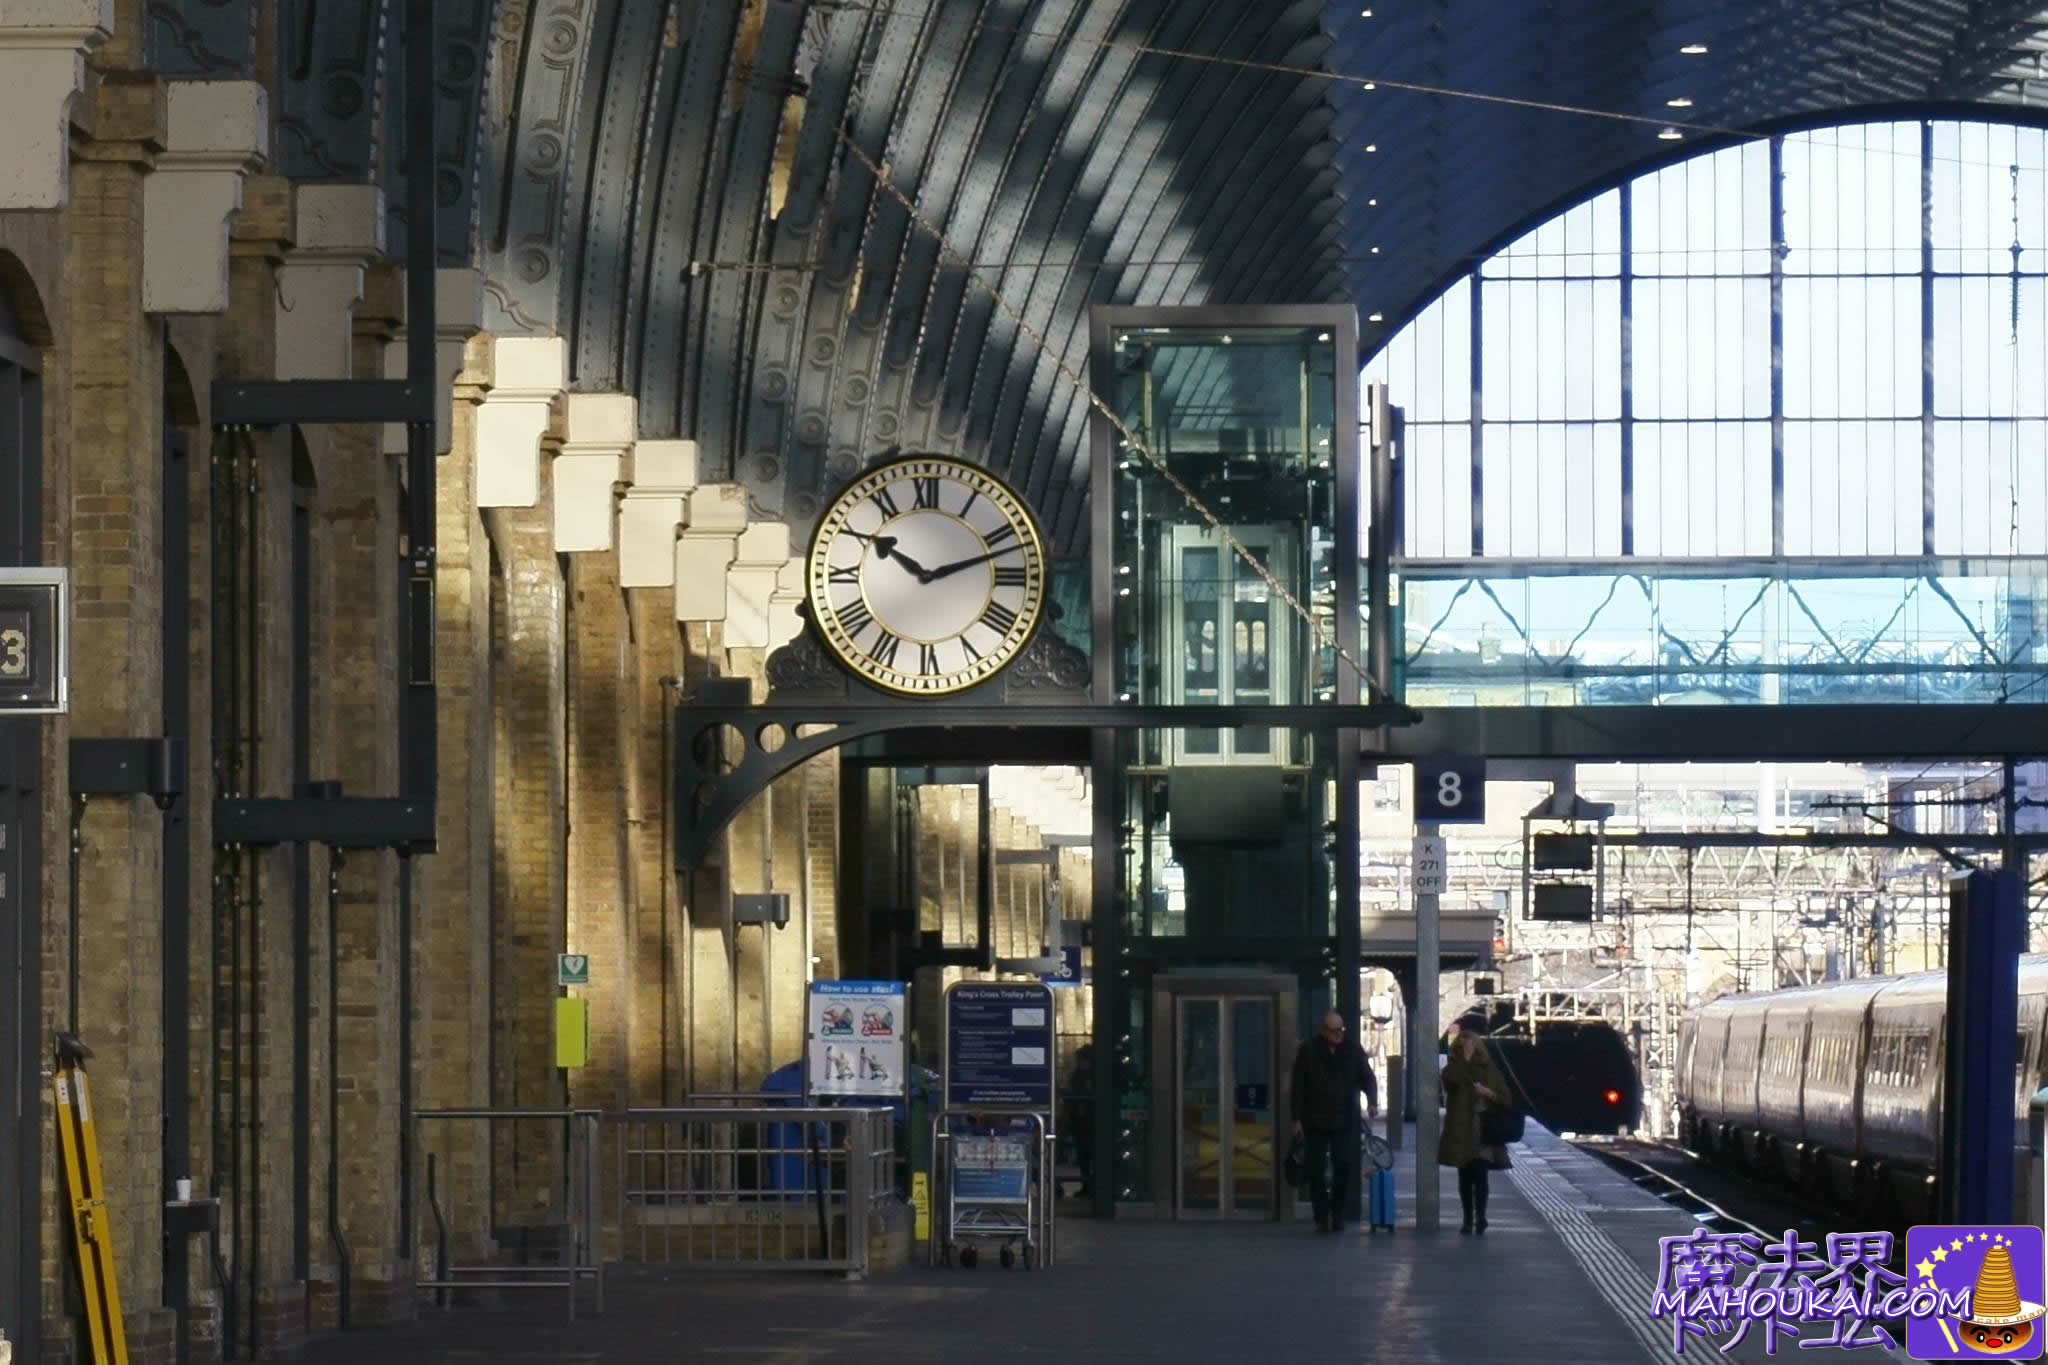 Large clock at the actual Kings Cross station.